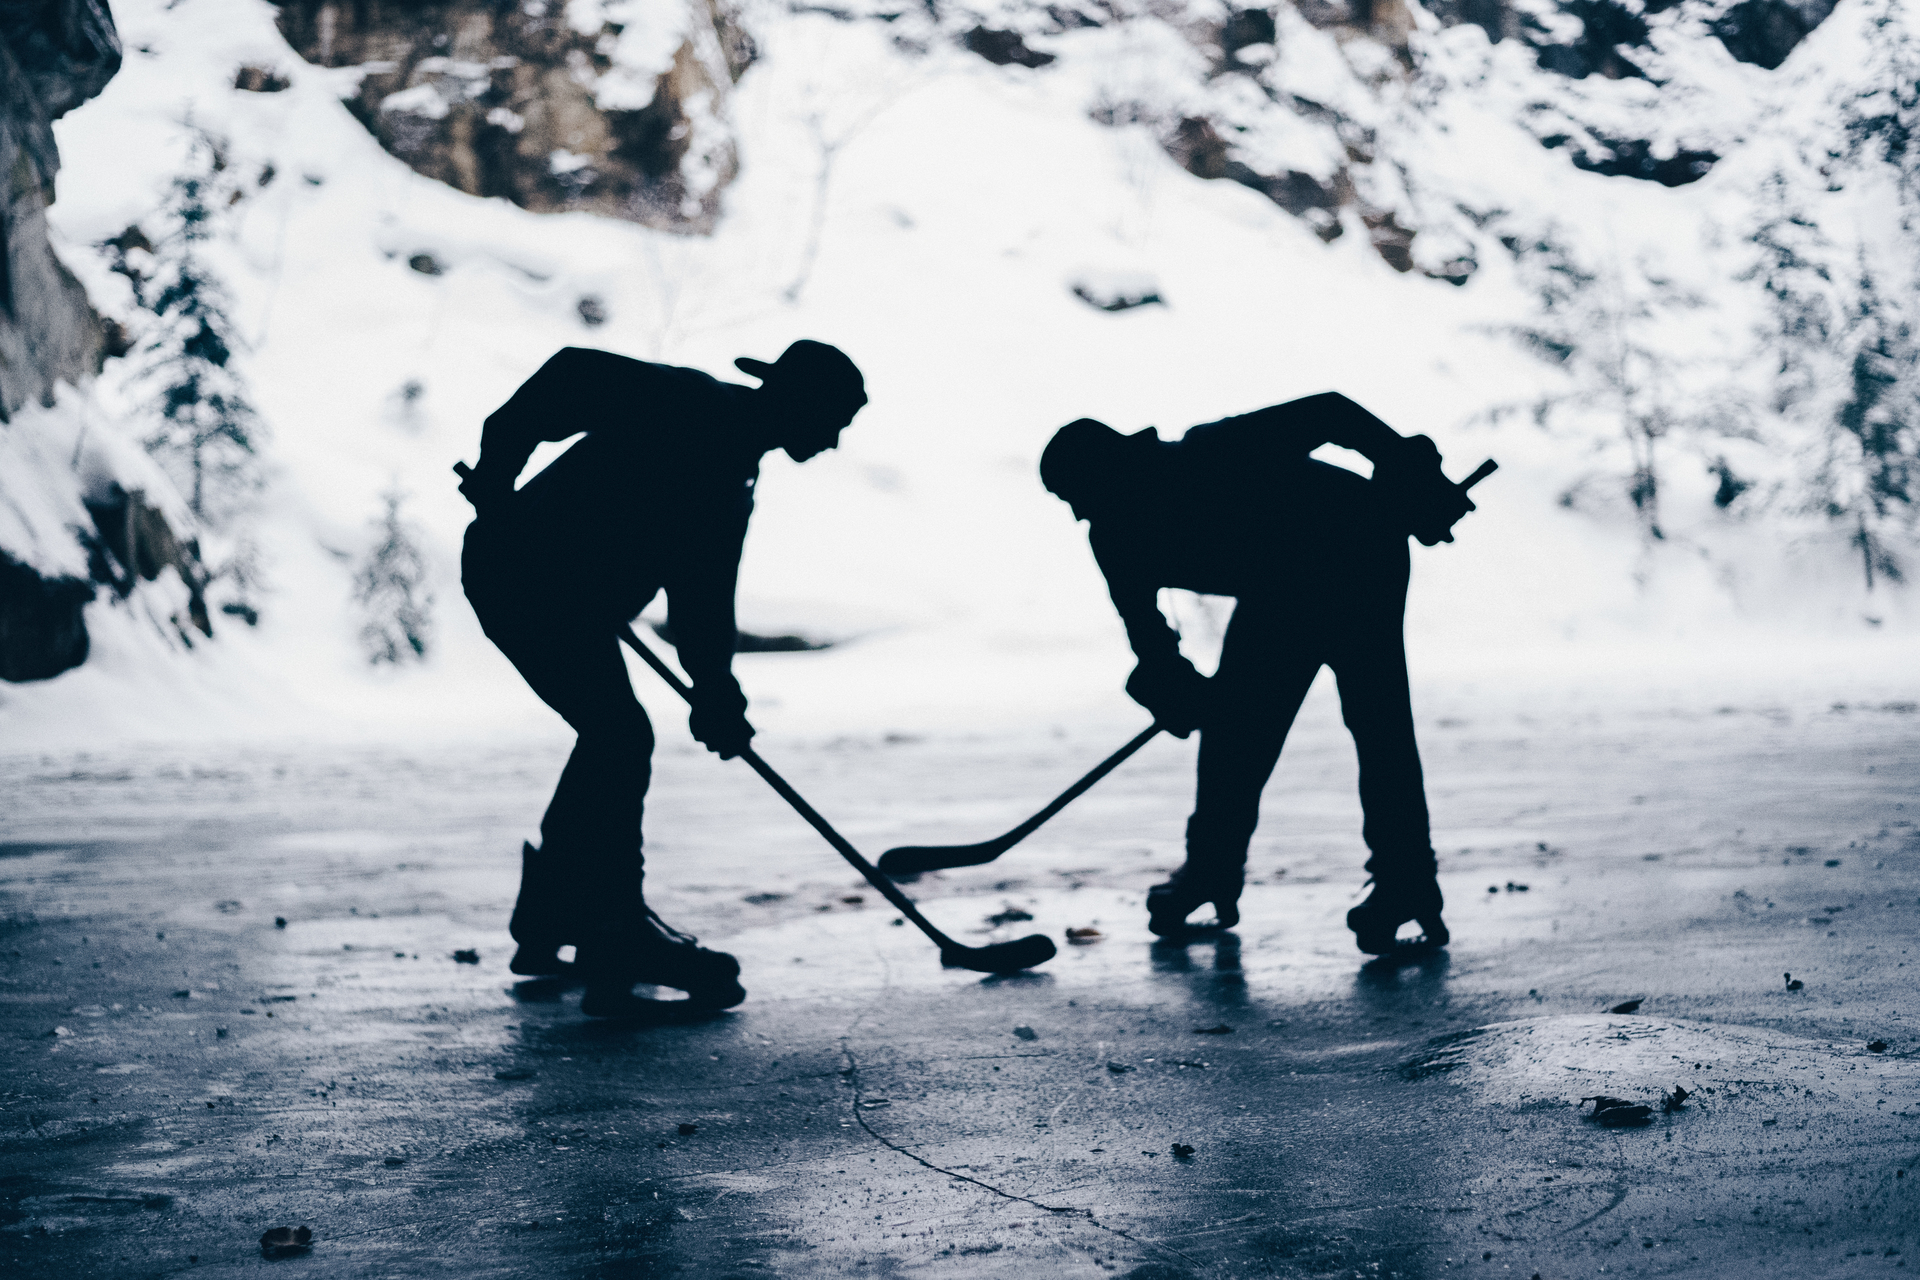 Black-and-white image of two boys playing shinny hockey